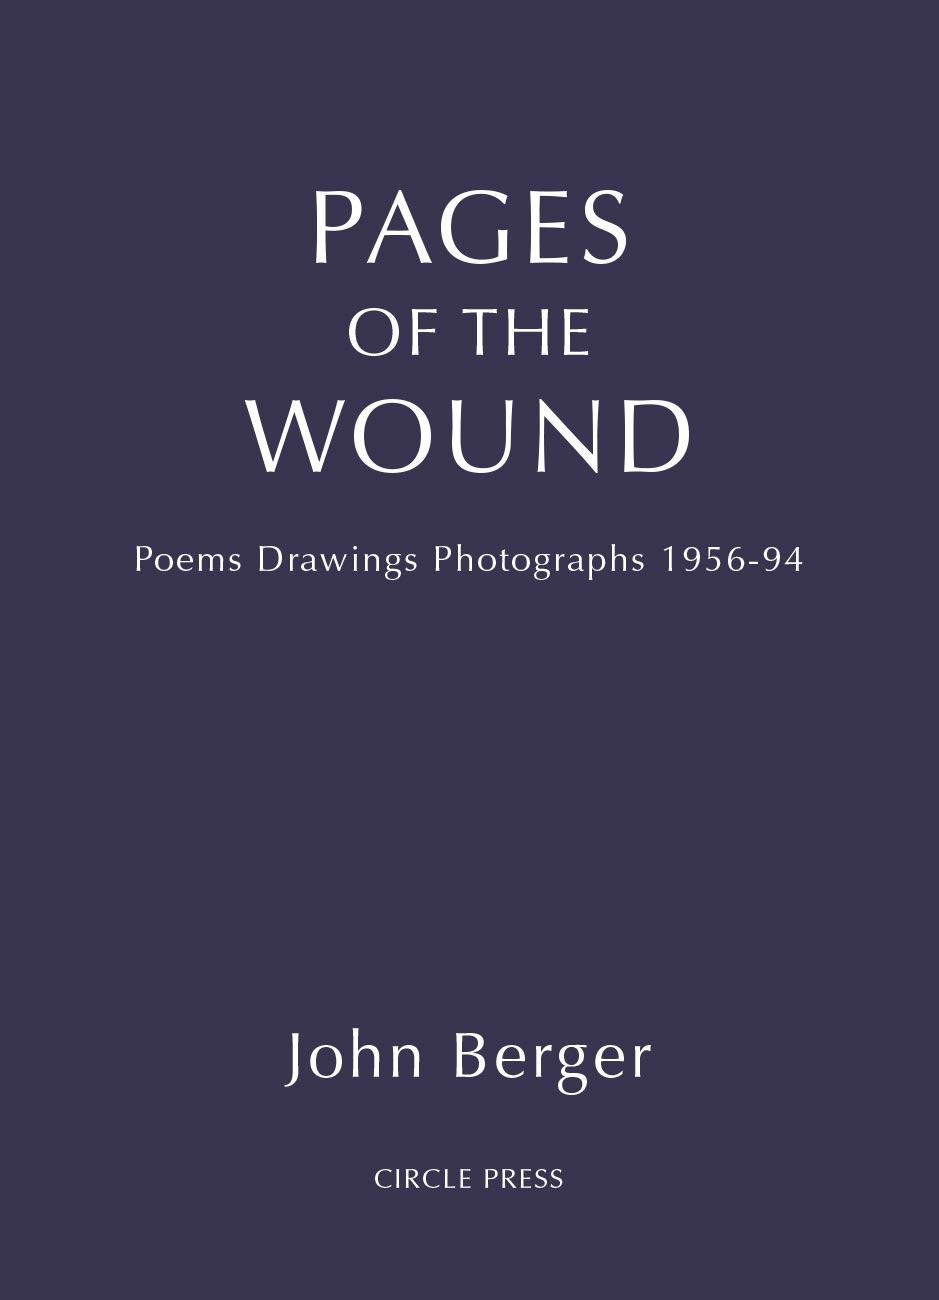 Pages of the Wound